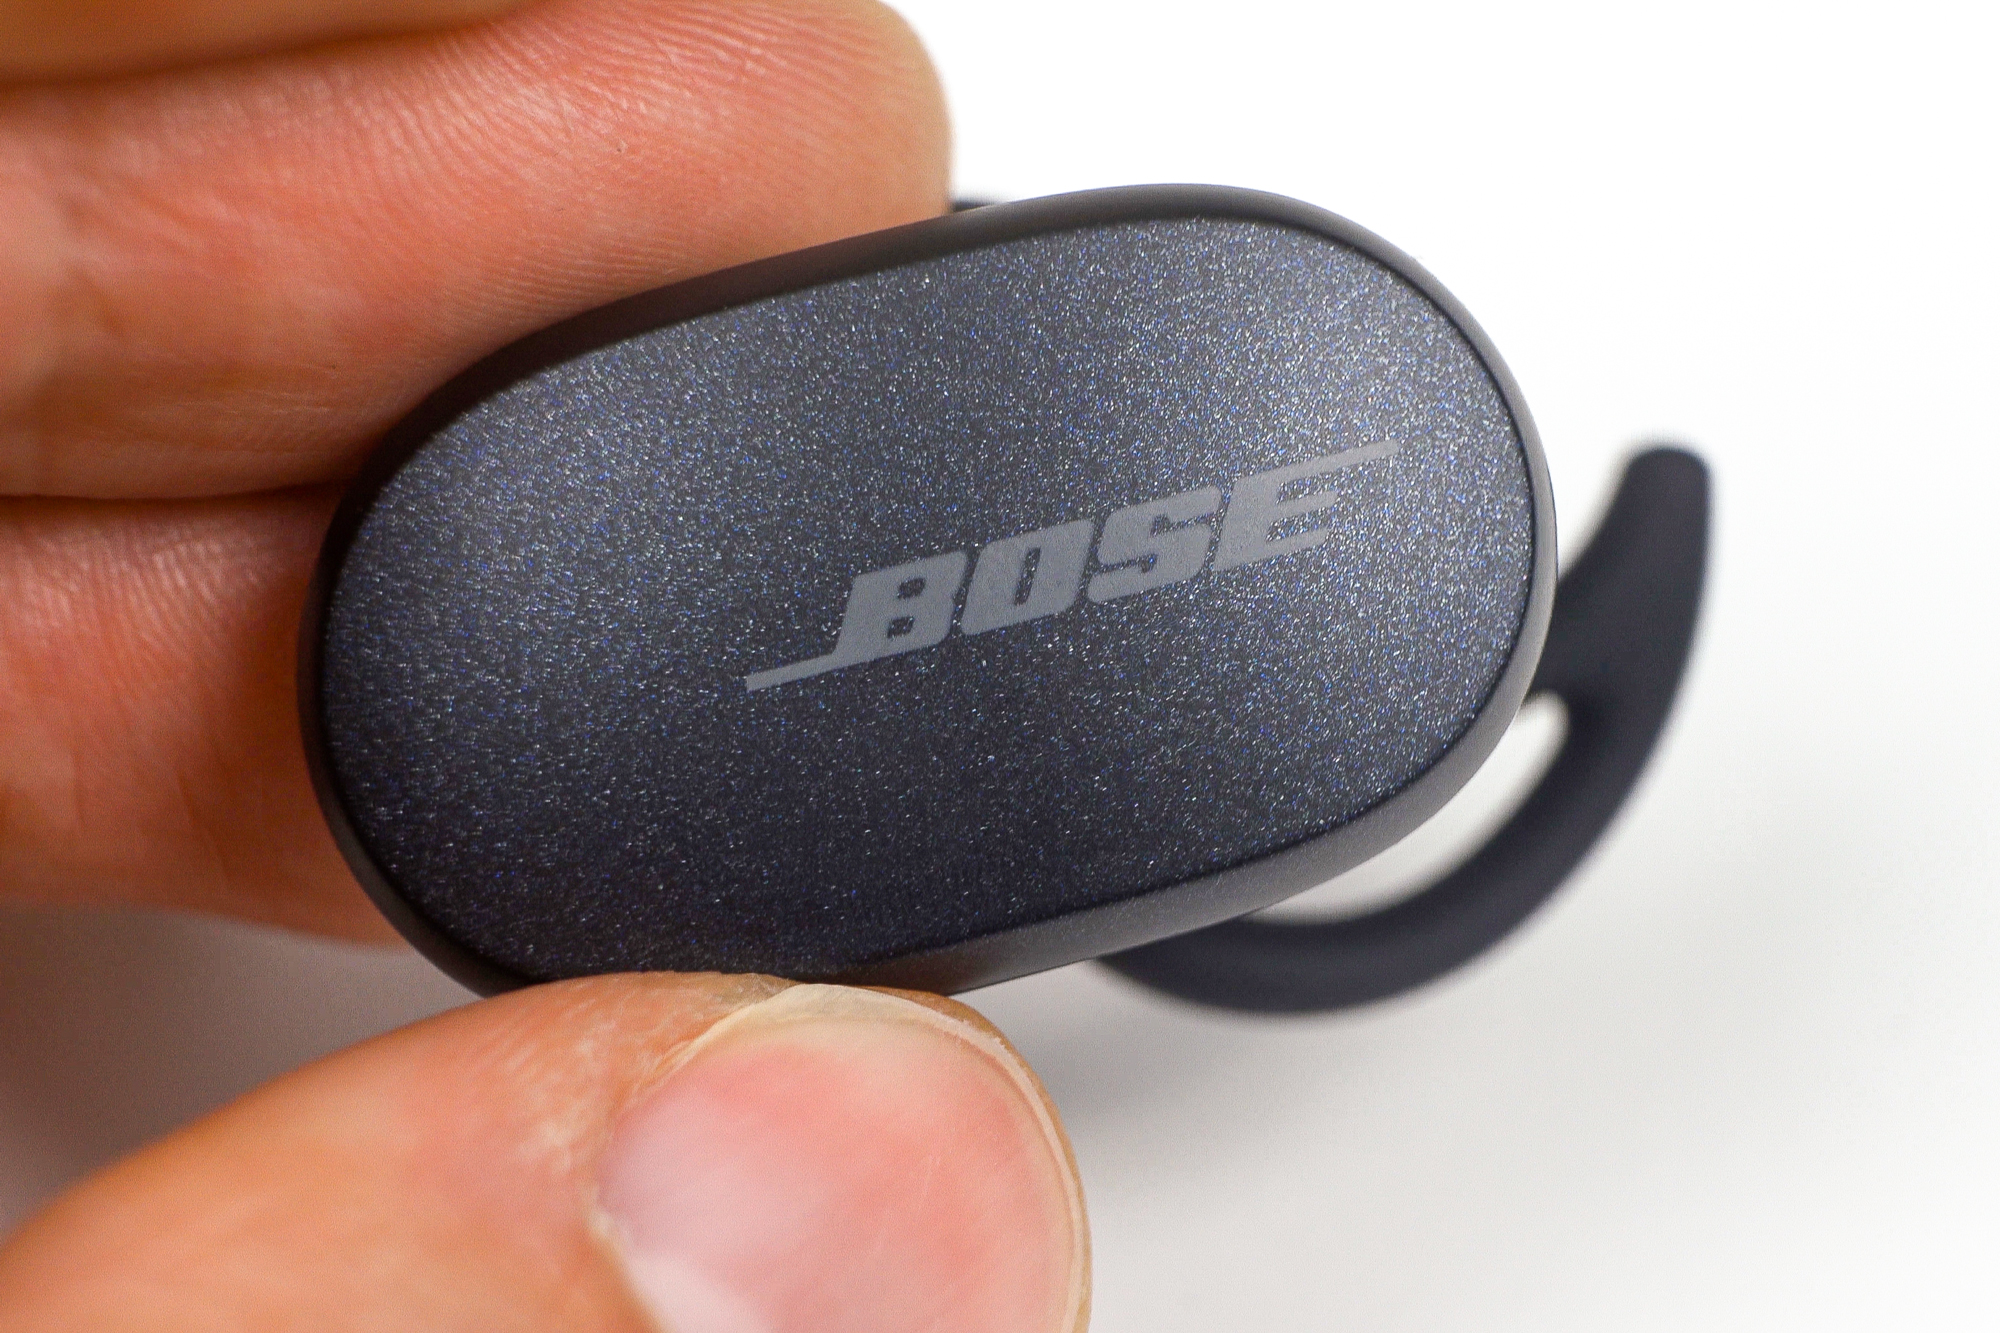 Bose QuietComfort Earbuds Review: Rich-Sounding Earbuds With Excellent ANC